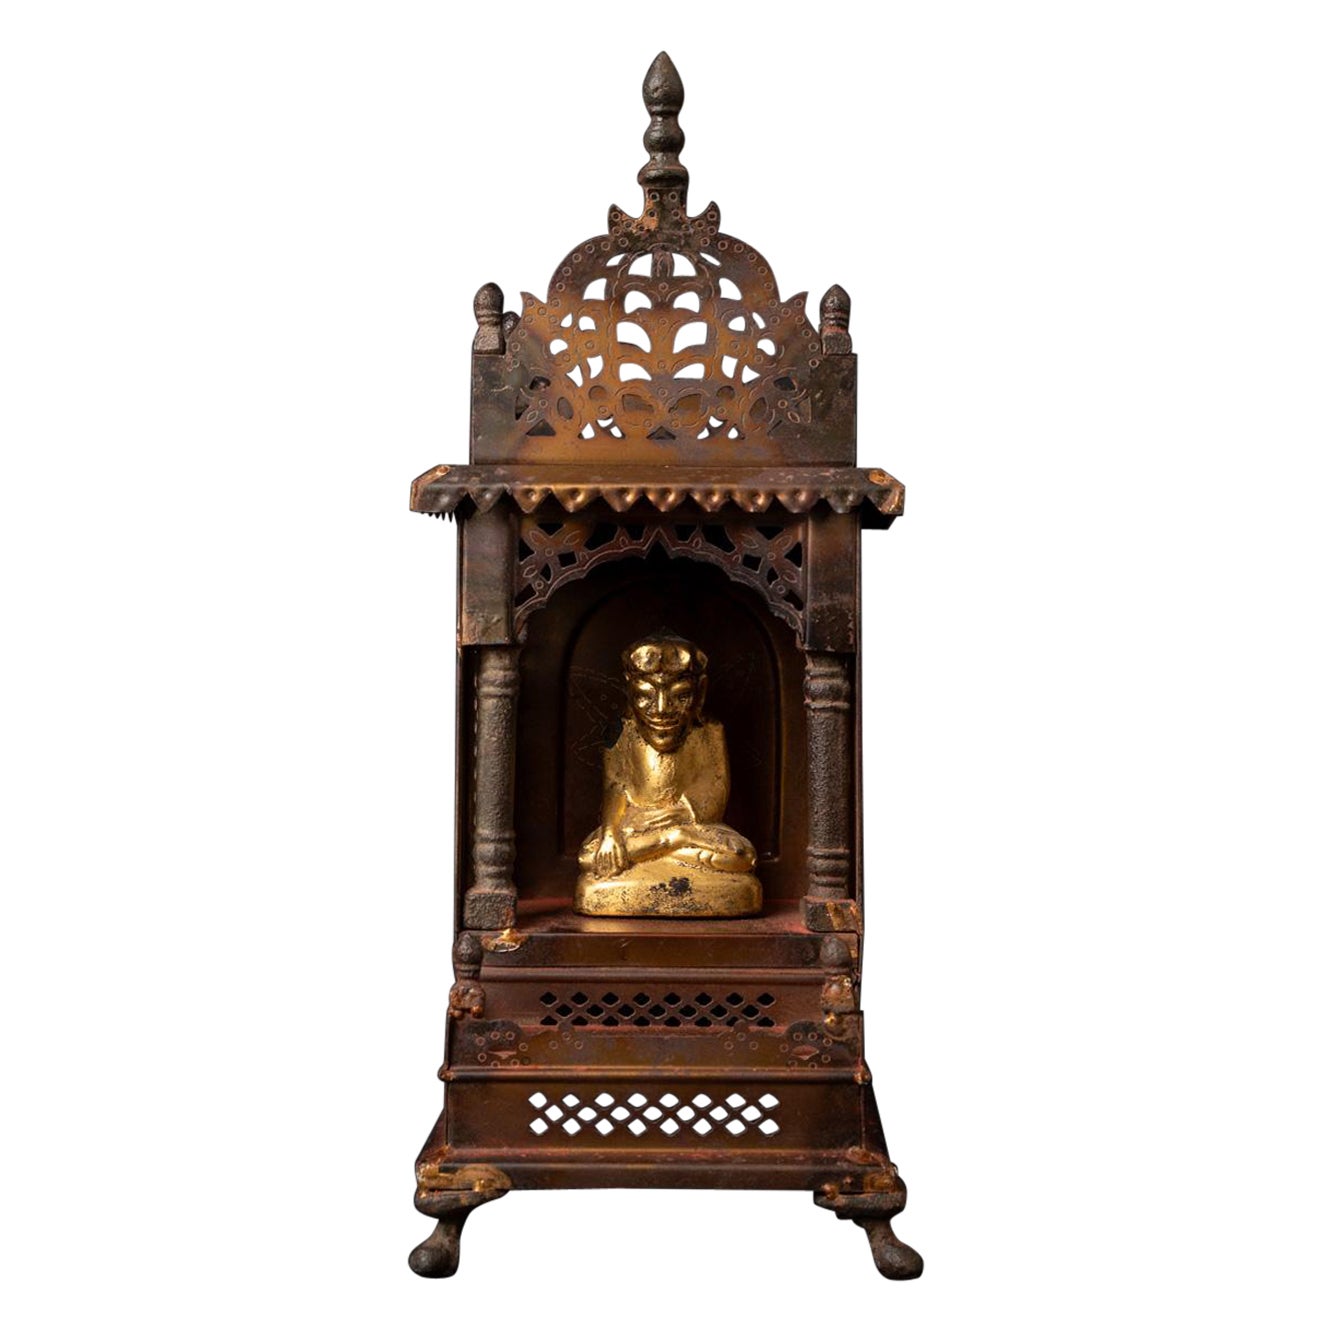 19th Century Old metal temple with antique wooden Buddha statue from Nepal